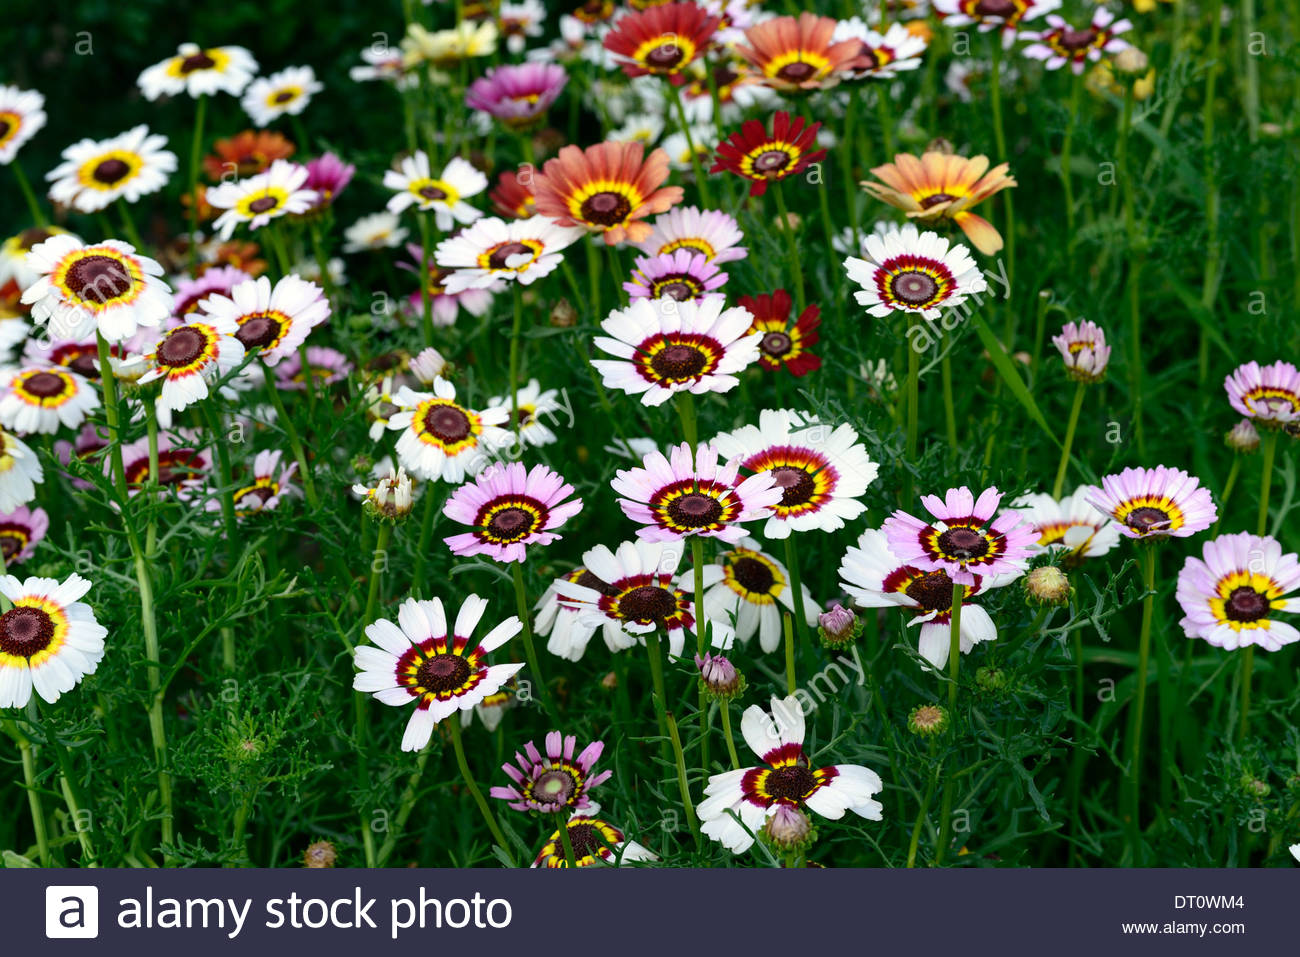 Painted Daisy Stock Photos & Painted Daisy Stock Images.